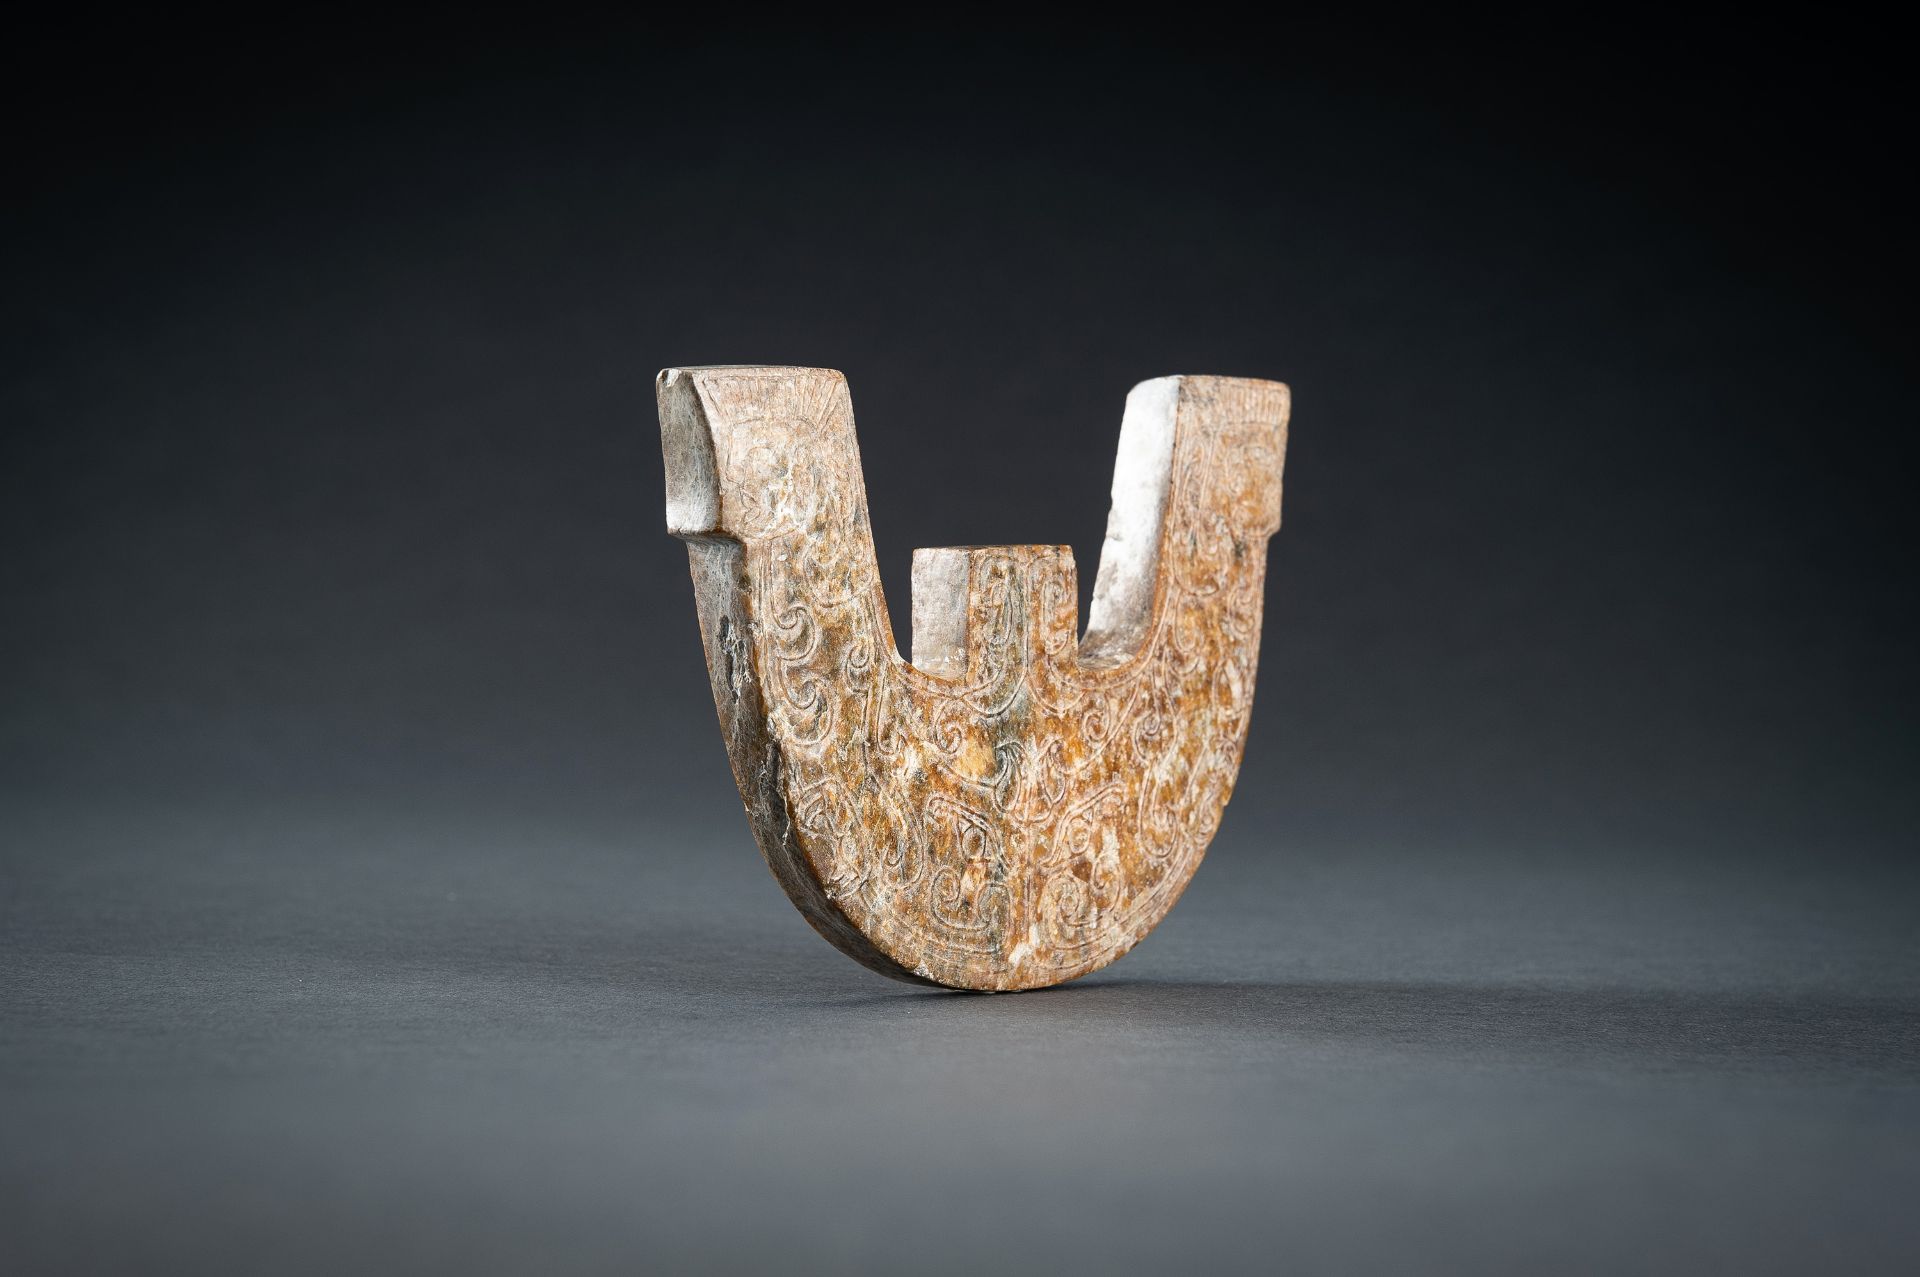 AN ARCHAISTIC THREE-PRONGED JADE ORNAMENT, QING - Image 7 of 16